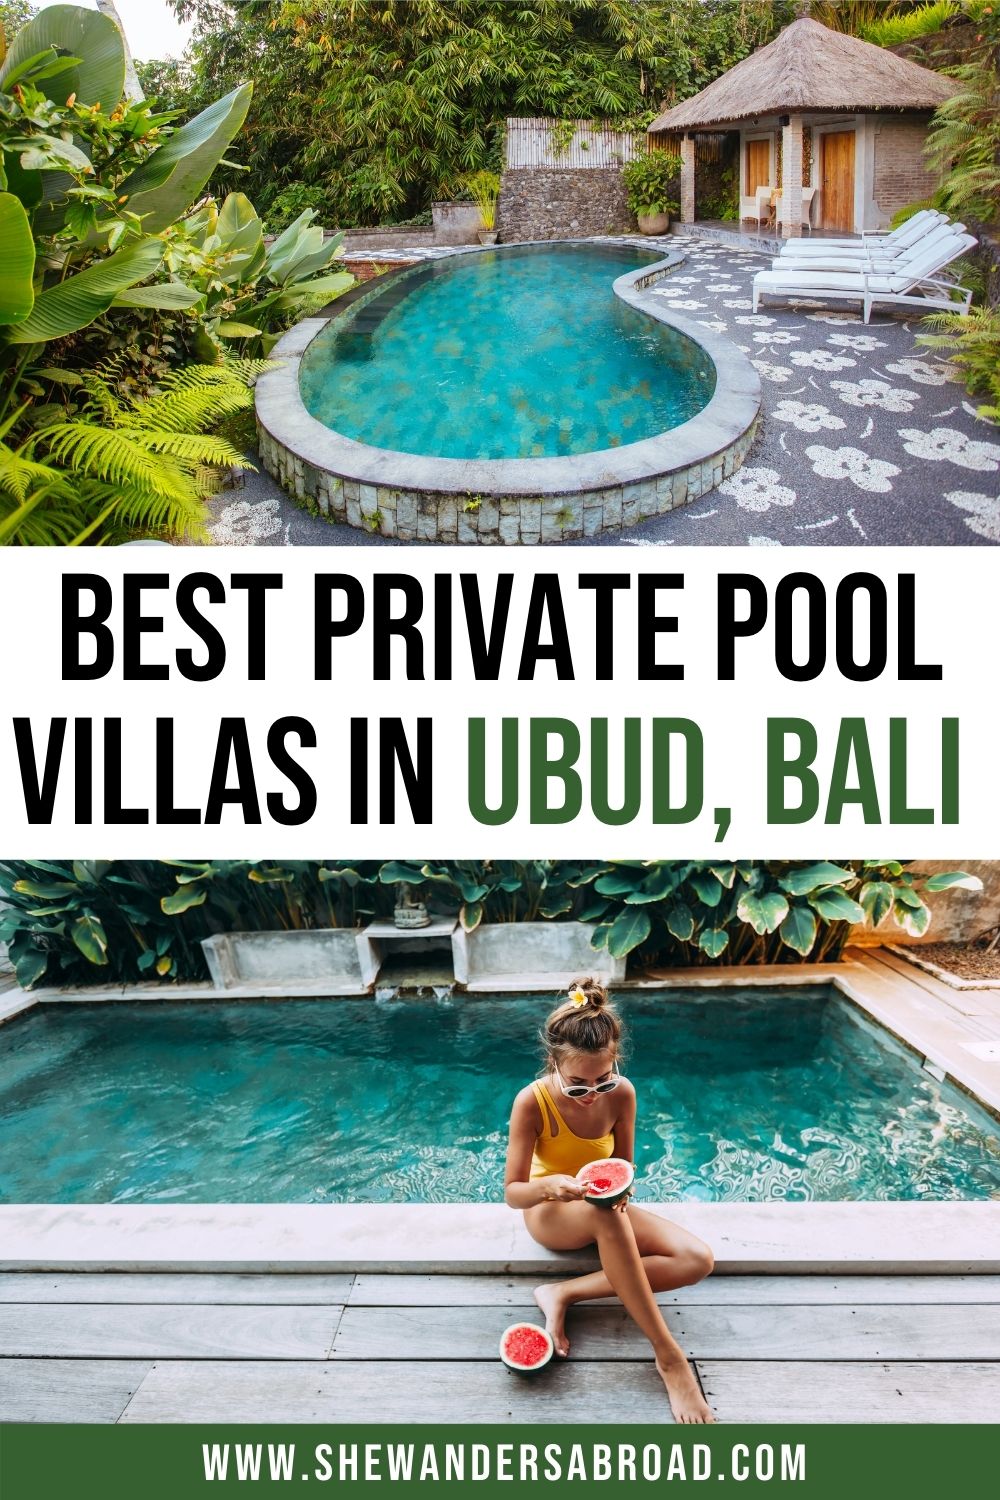 15 Best Private Pool Villas in Ubud for Every Budget | She Wanders Abroad